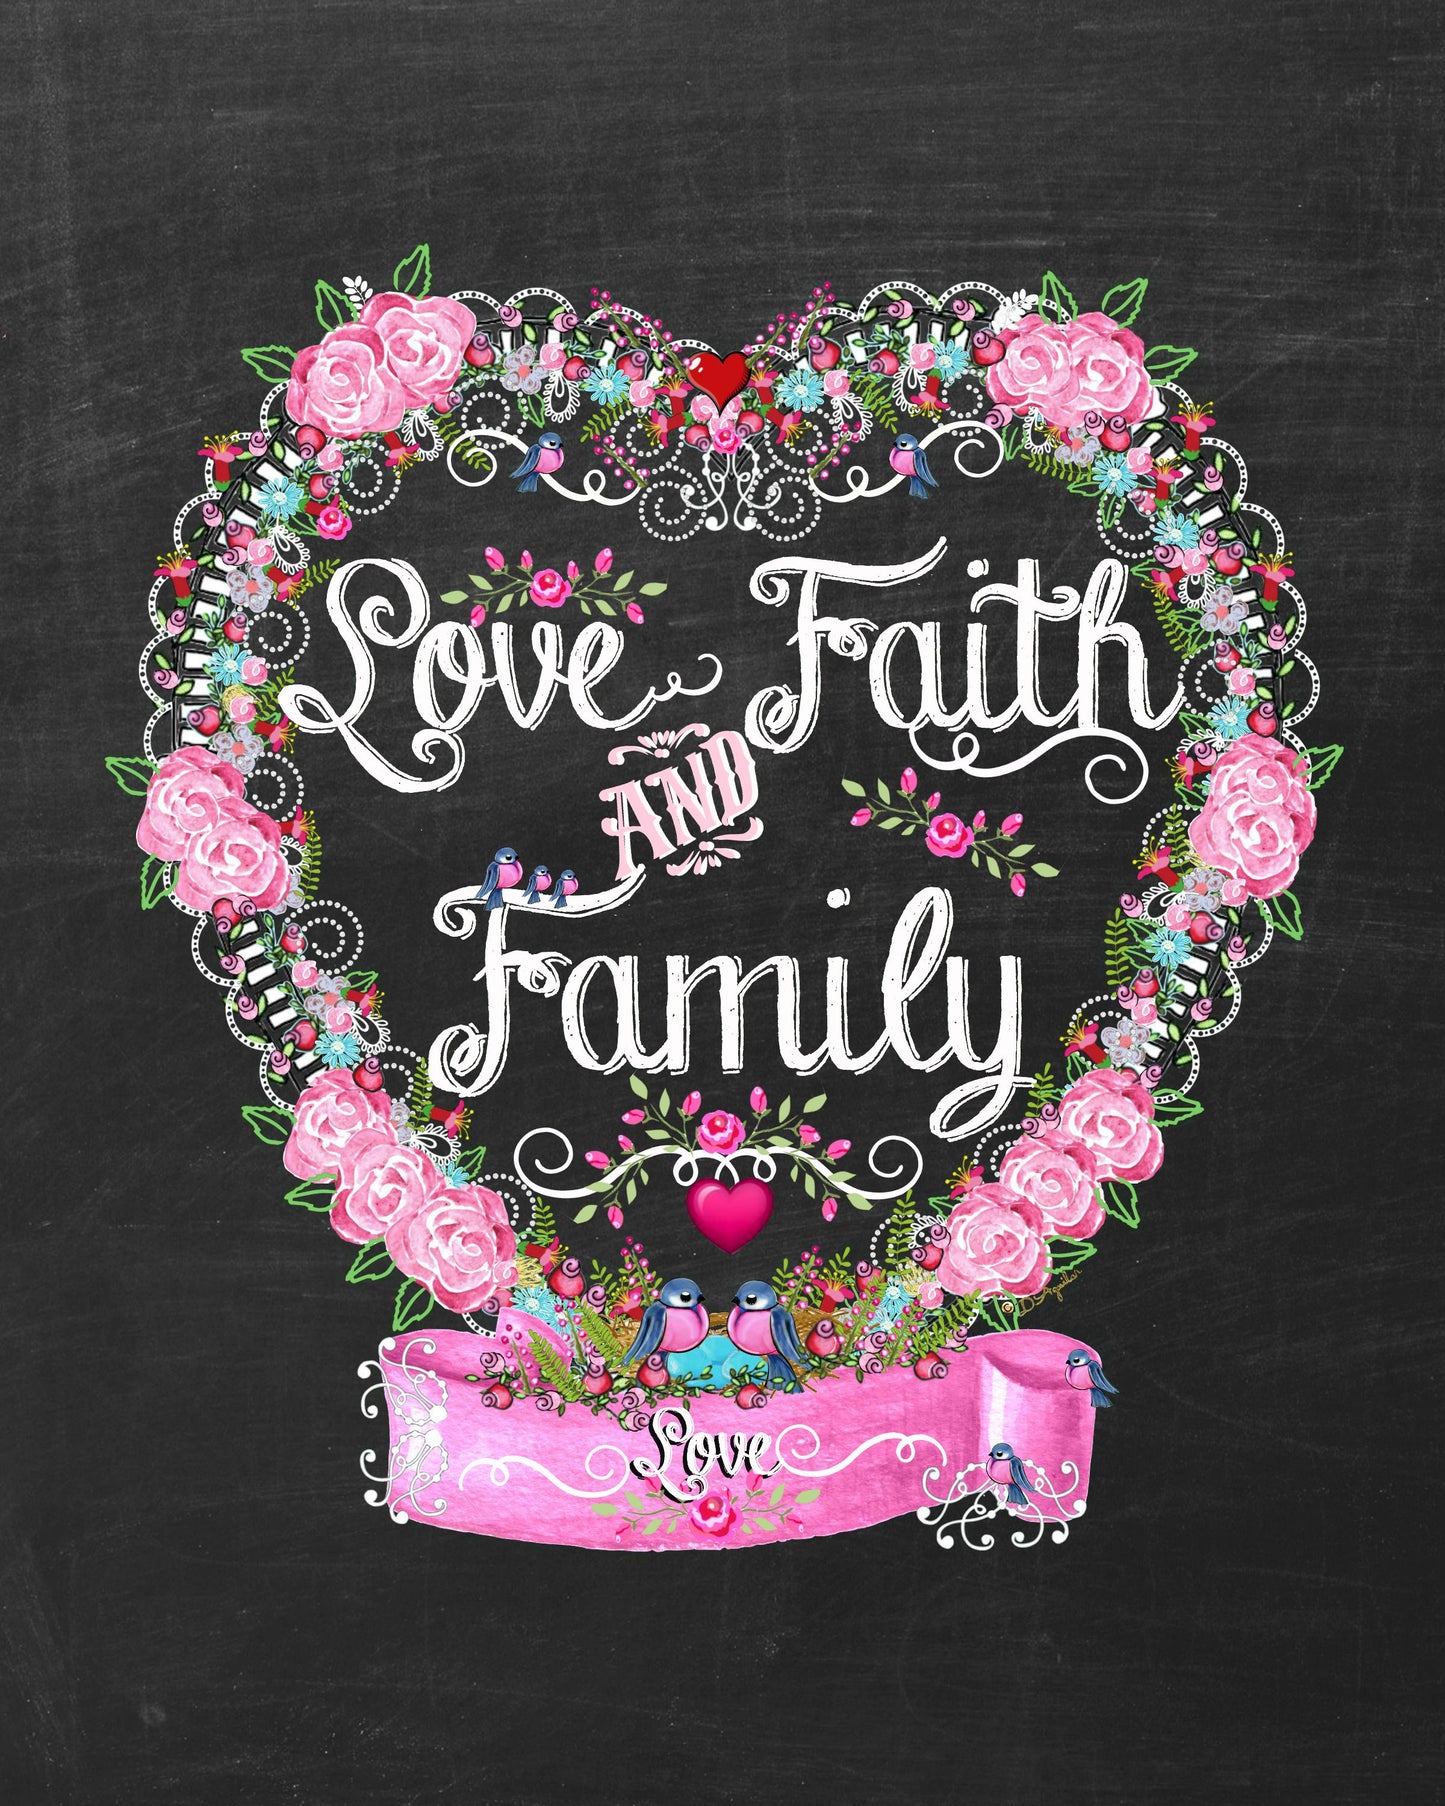 Love, Faith & Family Heart 8x10 Print Ready to Frame is part of a collection of matching prints